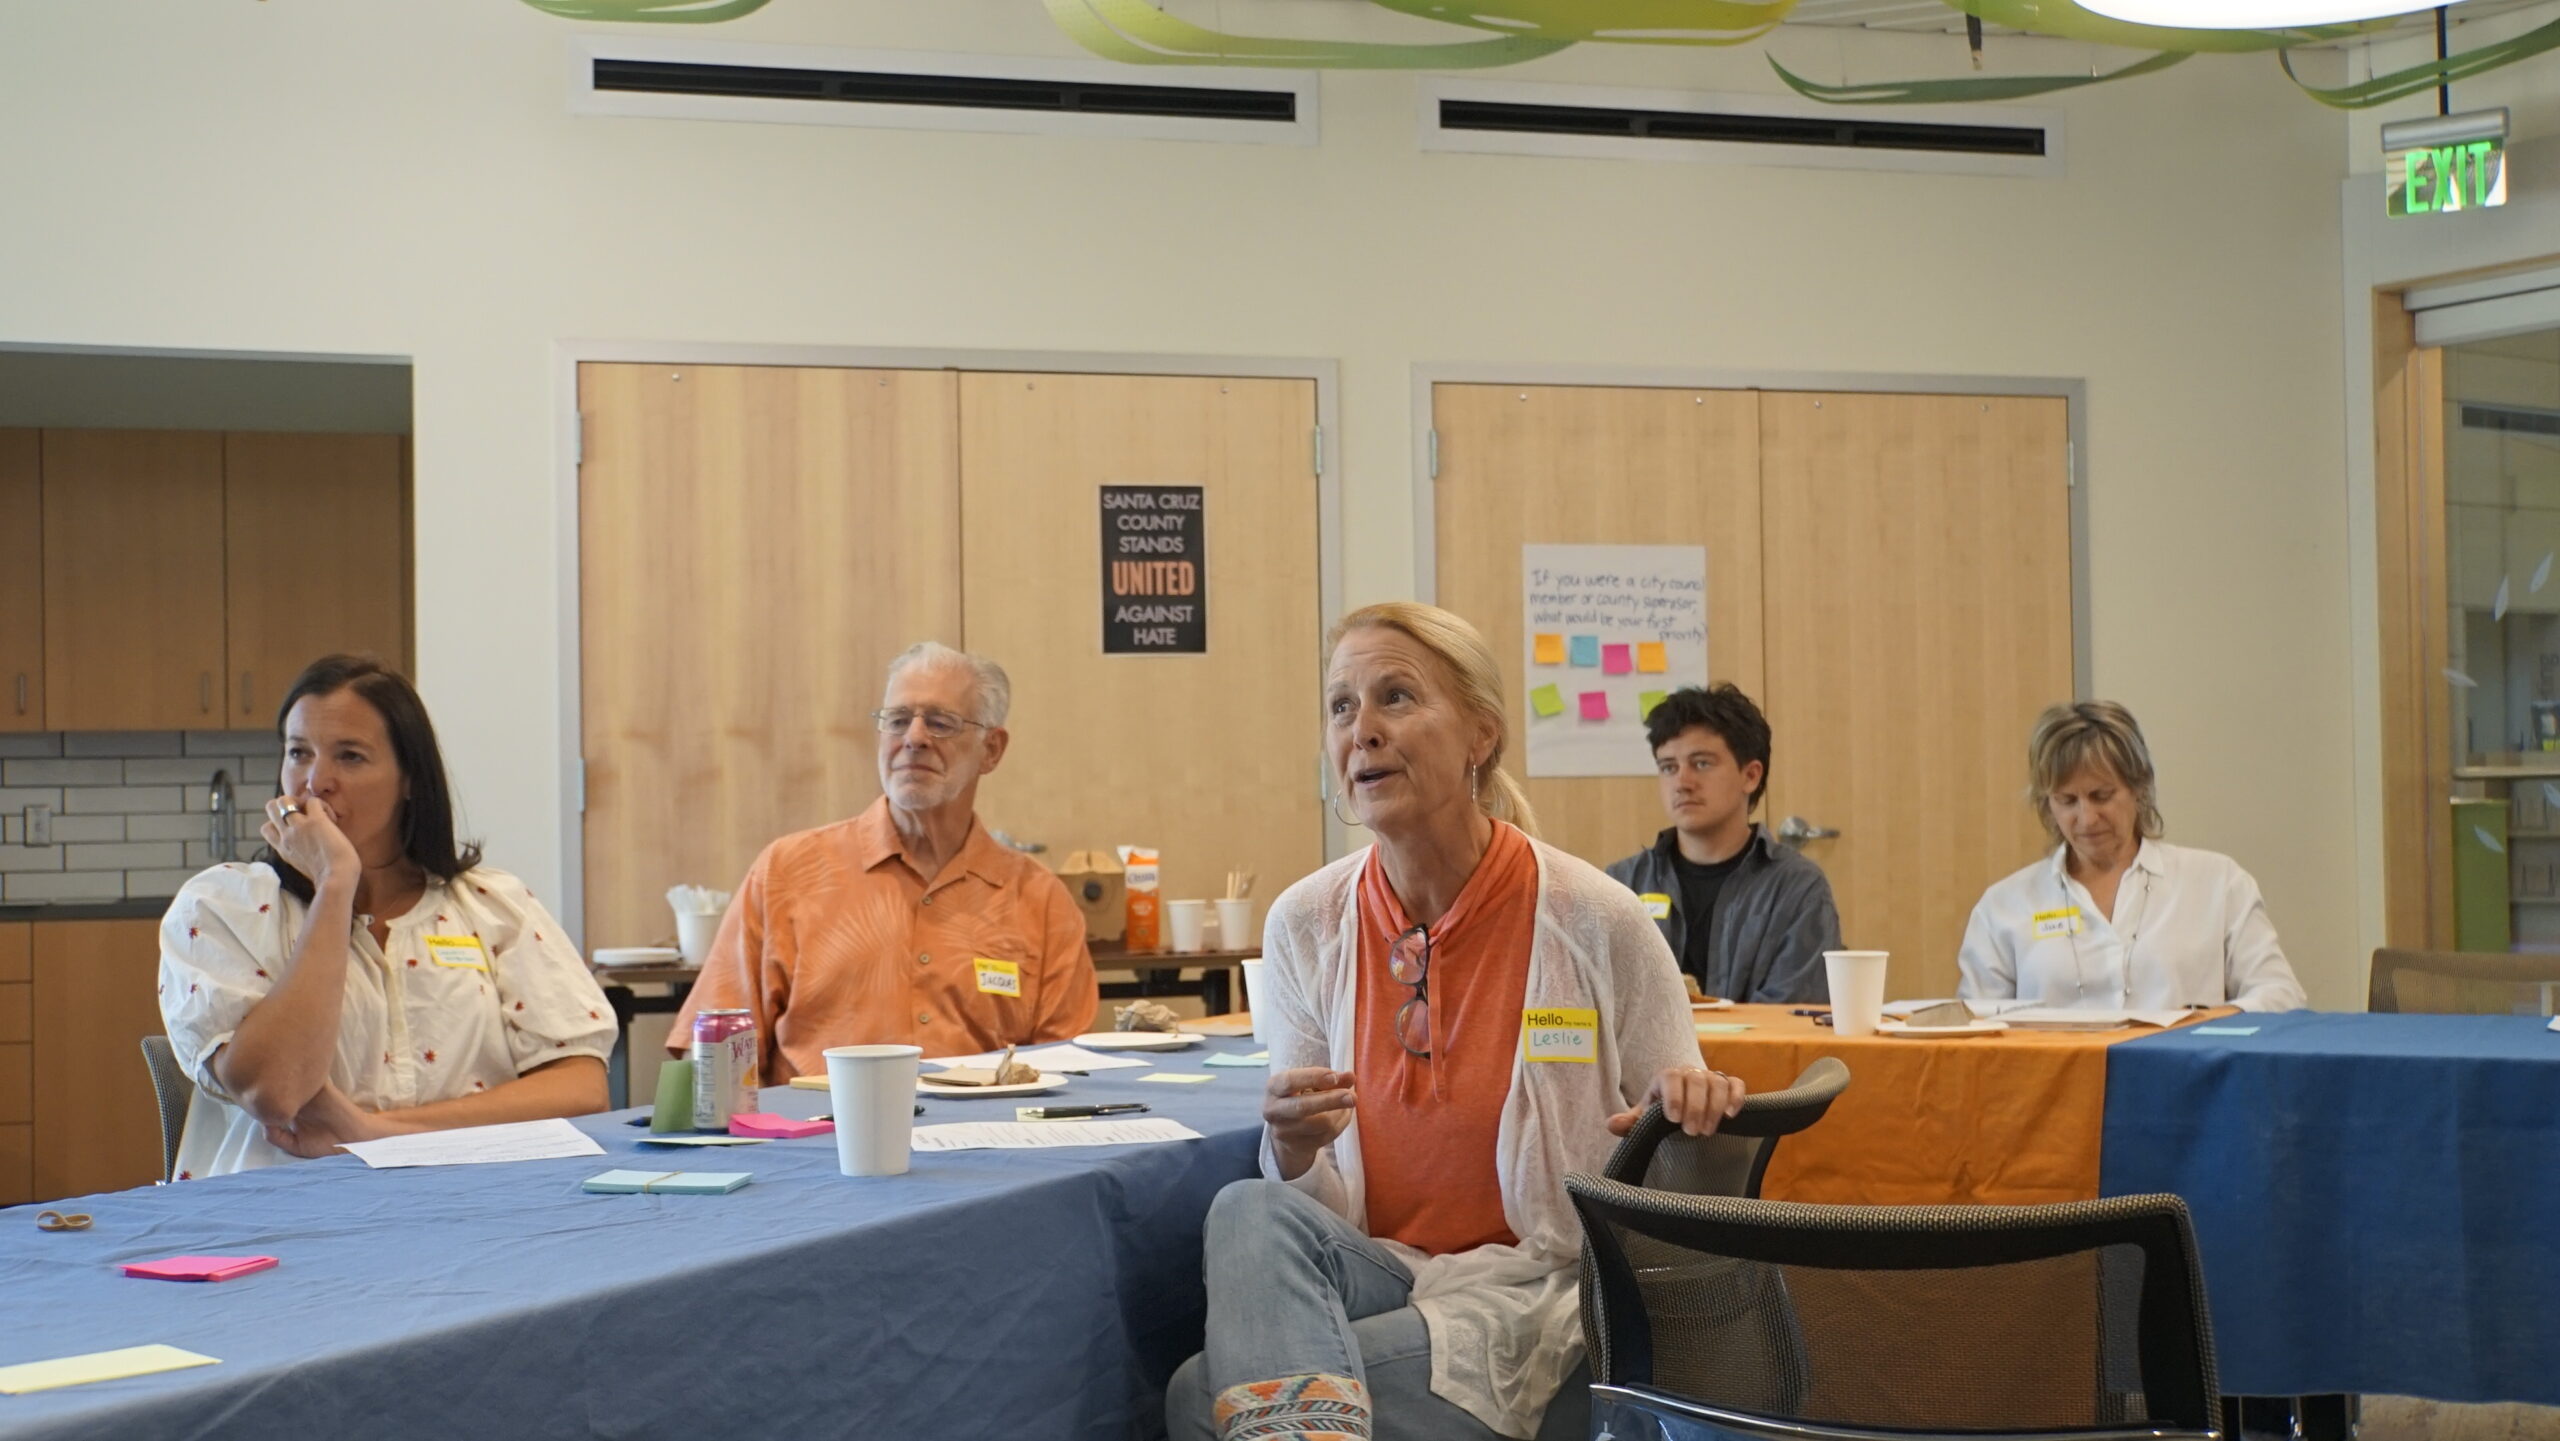 A photo of Leslie Nielsen at the listening session for residents to express concerns for Capitola council candidates to address in the Nov. 5 election.